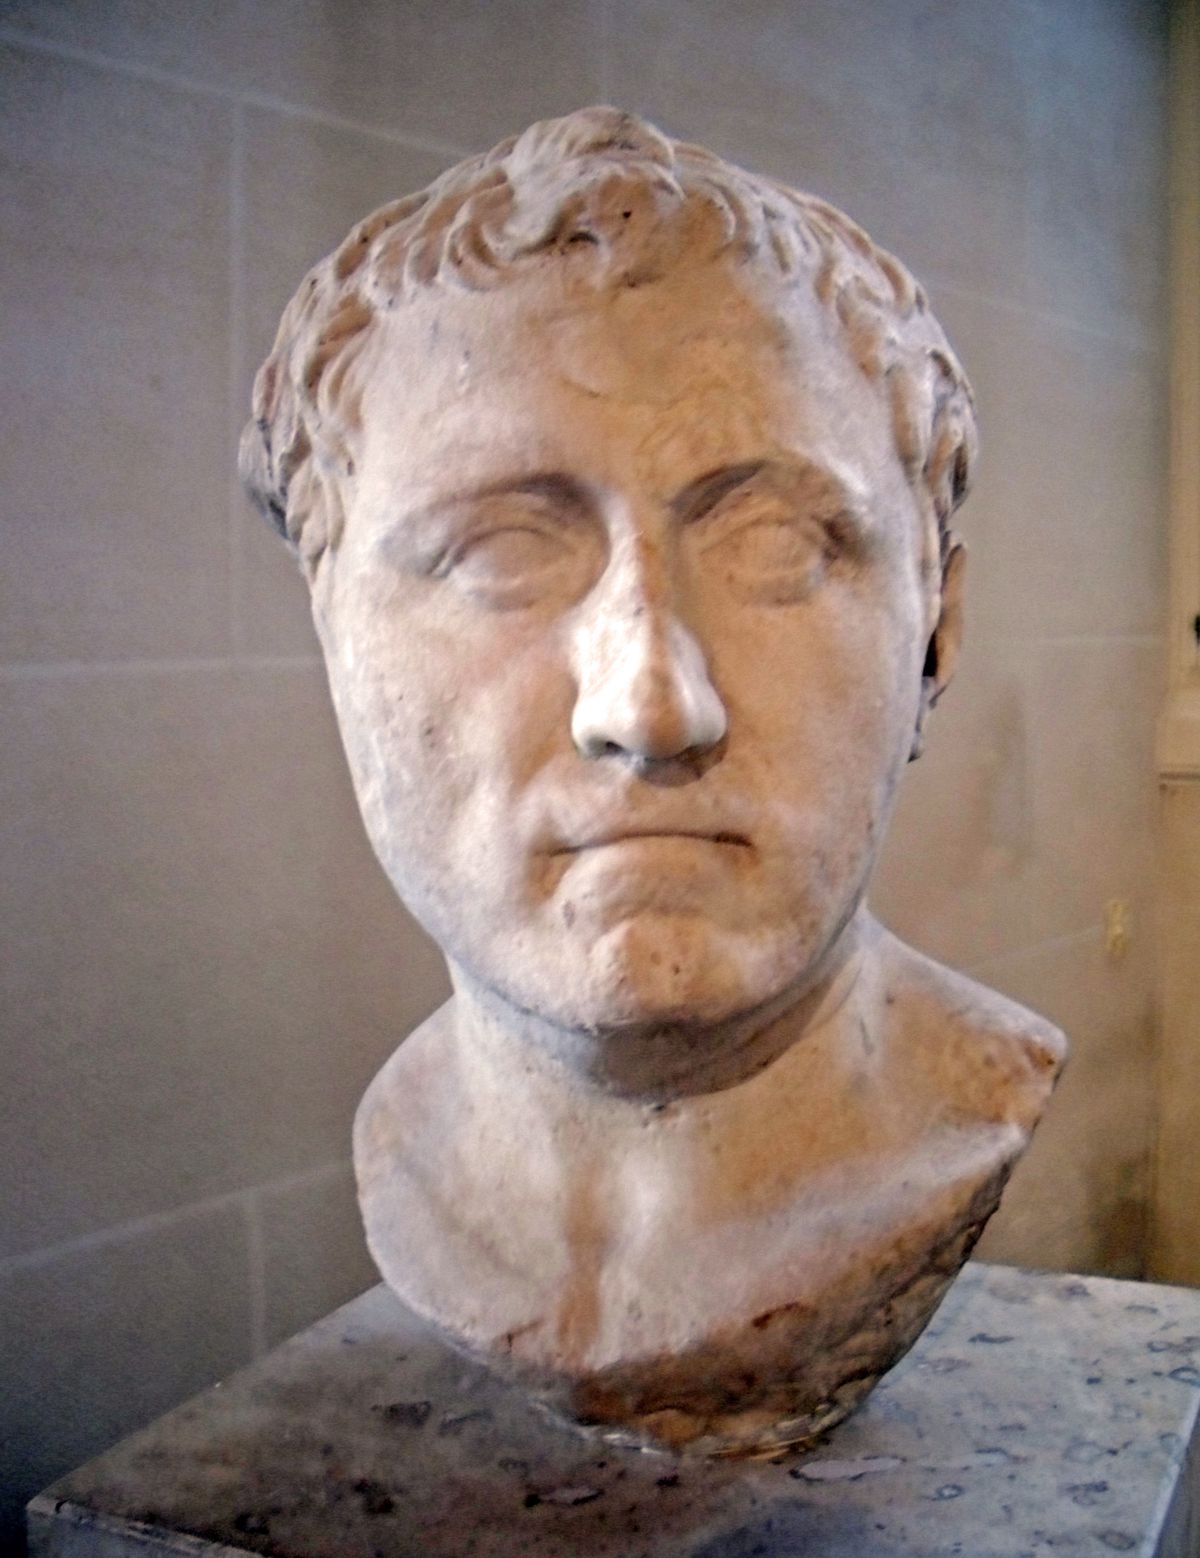 Pompey (Gnaeus Pompeius Magnus), Pompey the Great 106 BC - 48 BC, military and political leader of the late Roman Republic. established himself in the ranks of Roman nobility by successful leadership in several campaigns...